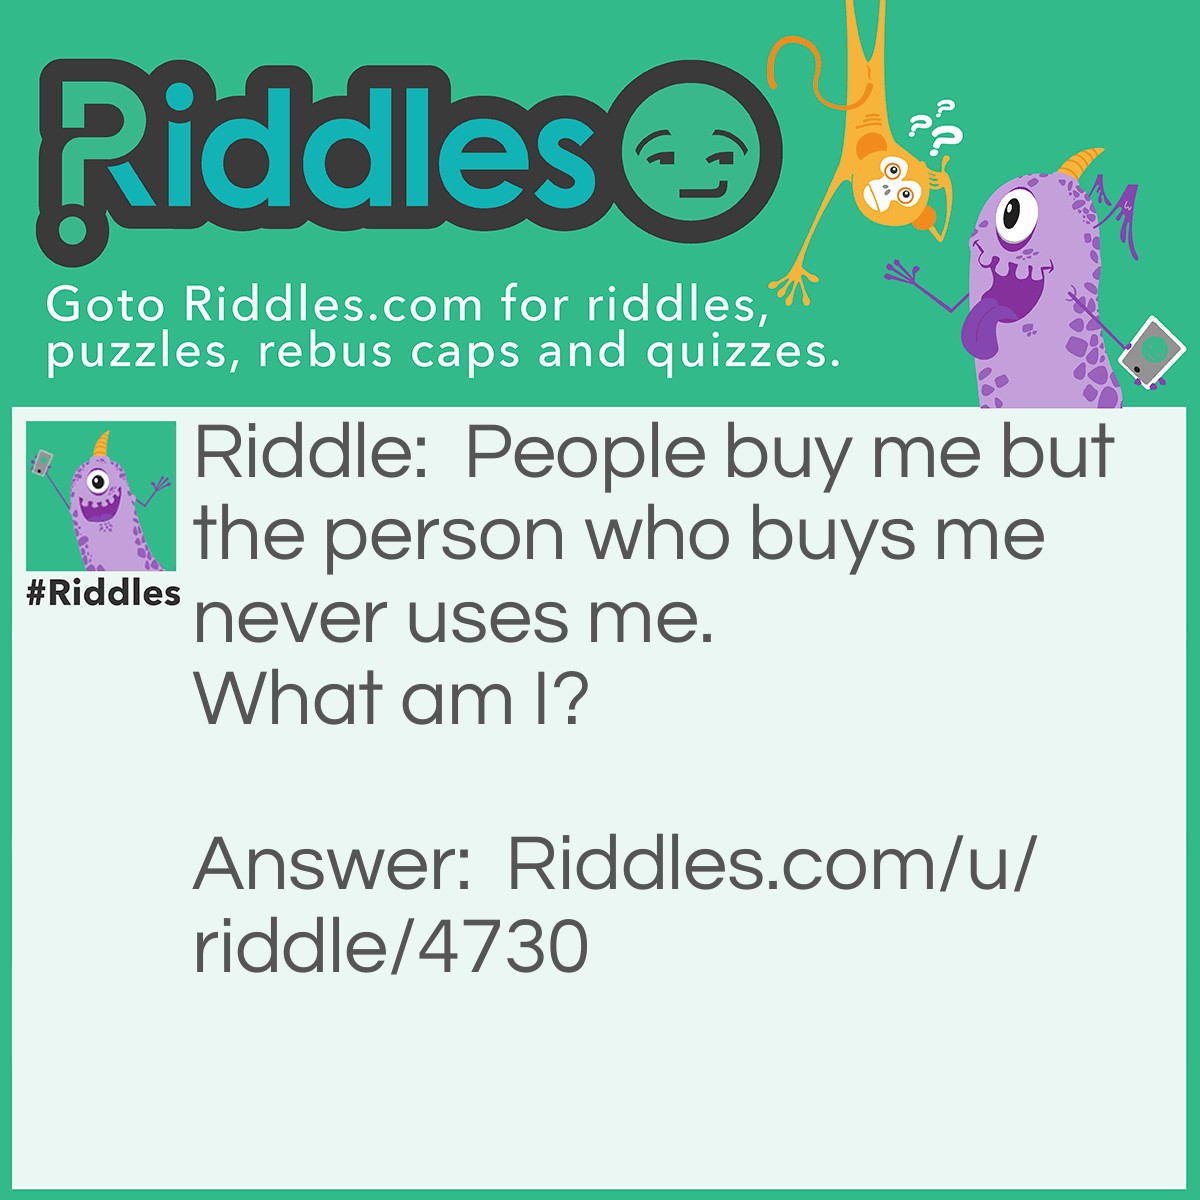 Riddle: People buy me but the person who buys me never uses me.  What am I? Answer: A coffin :)